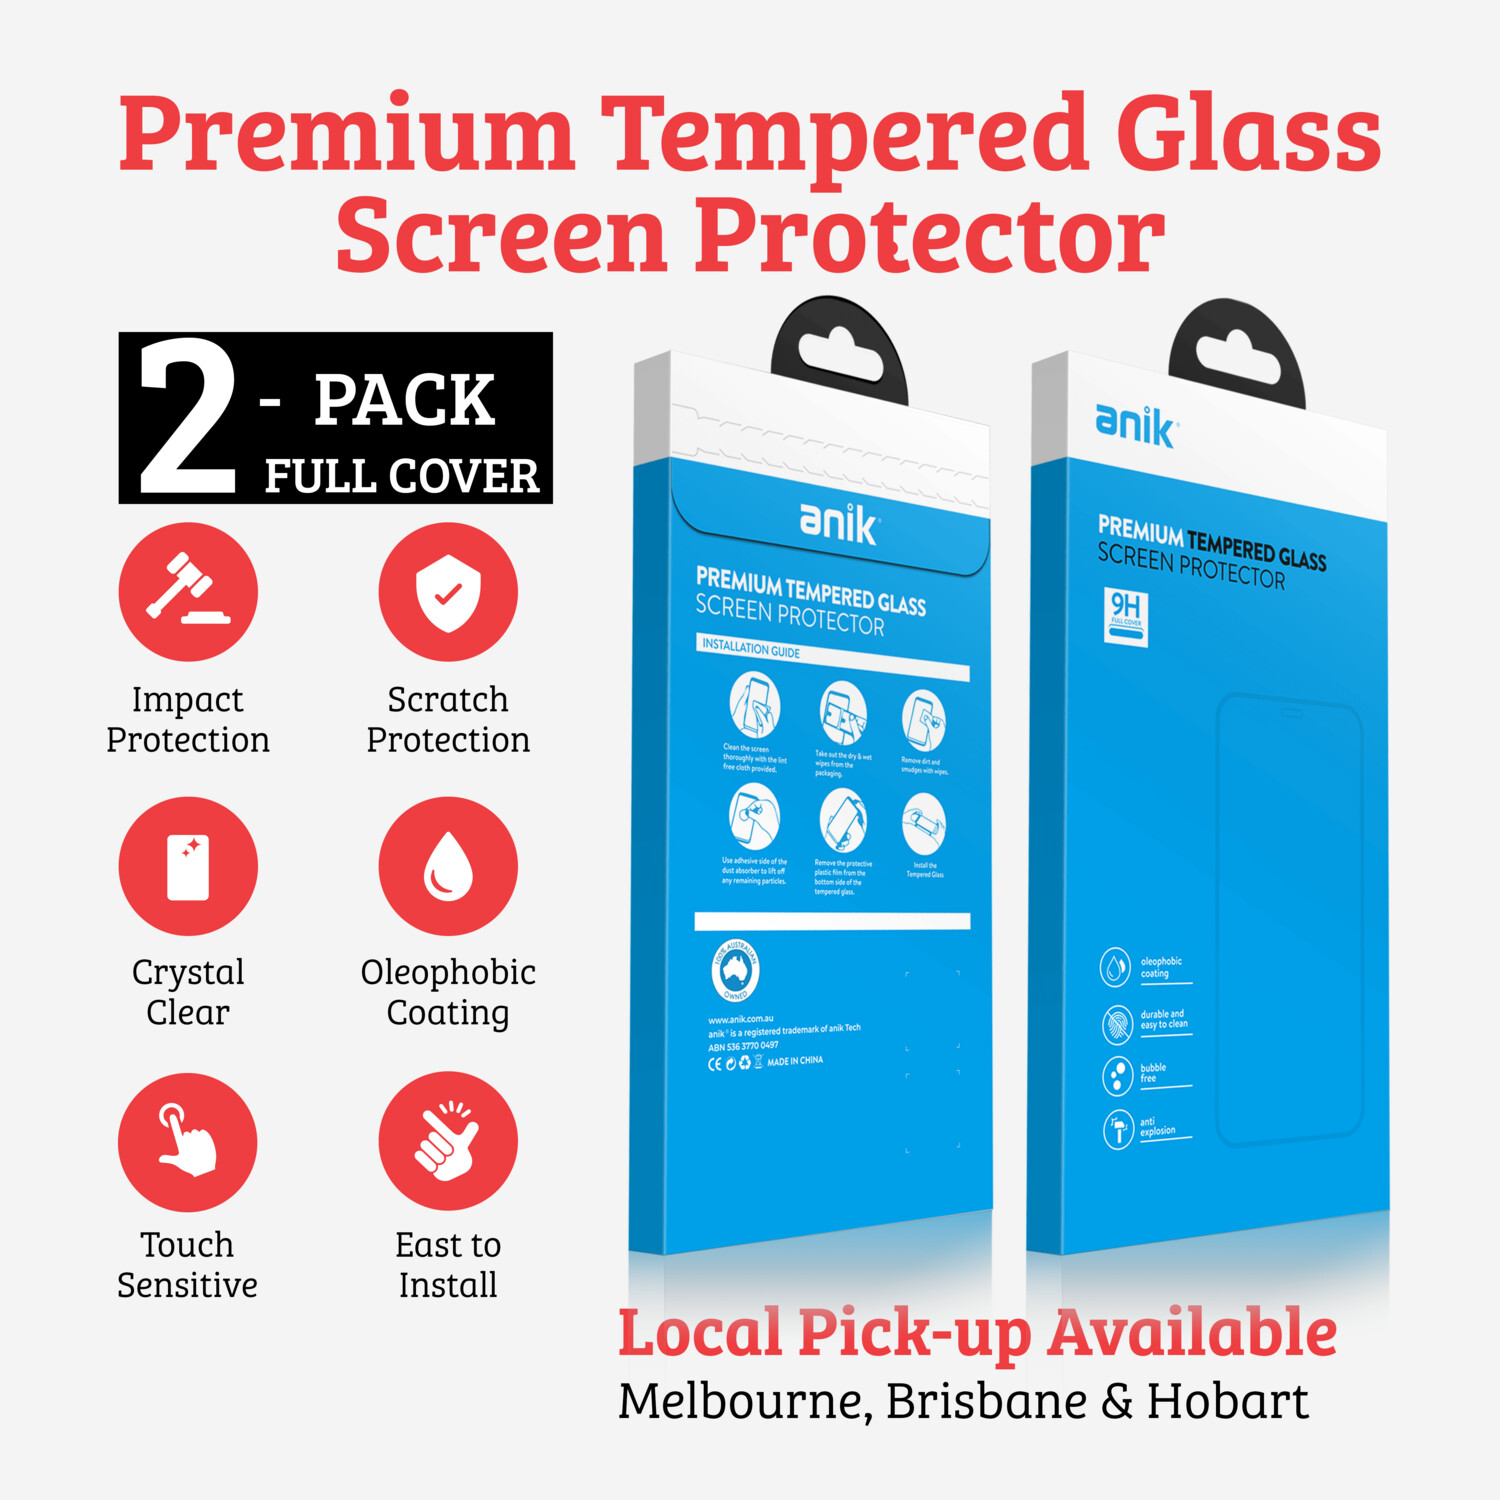 ANIK Premium Full Cover Tempered Glass Screen Protector for iPhone 11 Pro Max [2 Pack]